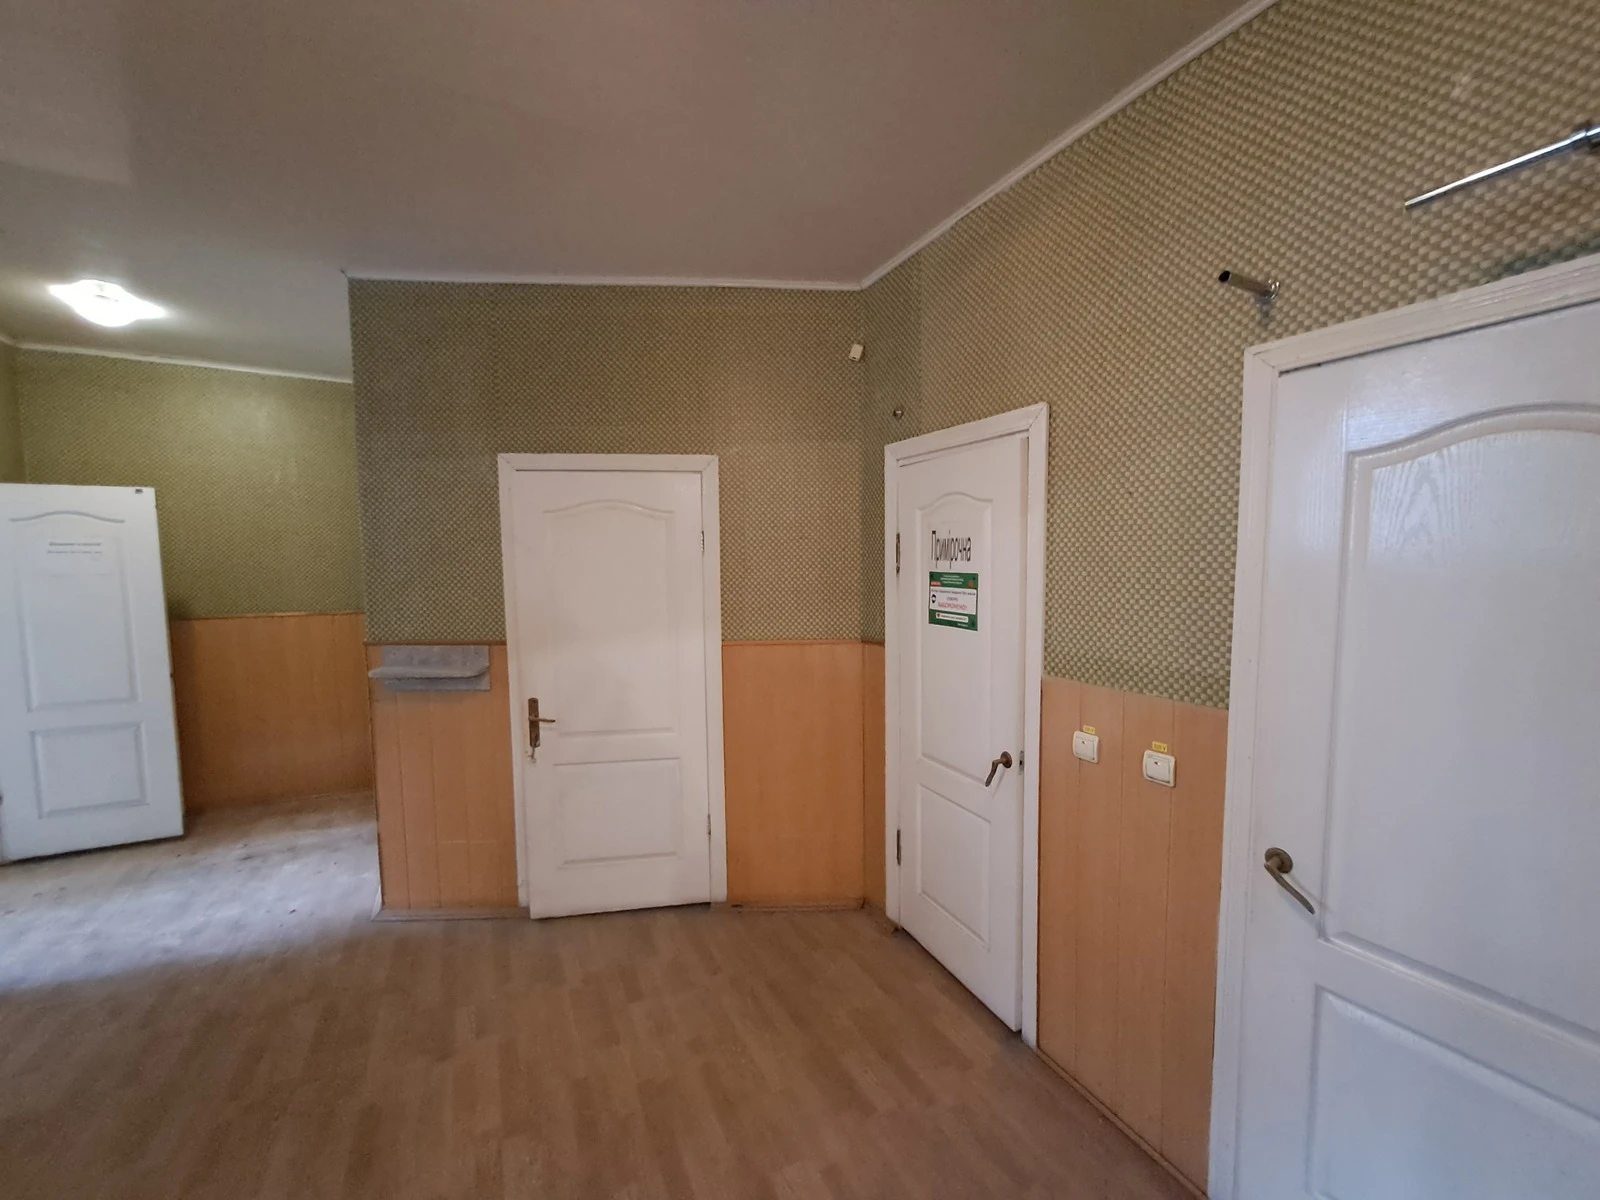 Real estate for sale for commercial purposes. 170 m², 1st floor/5 floors. Vostochnyy, Ternopil. 